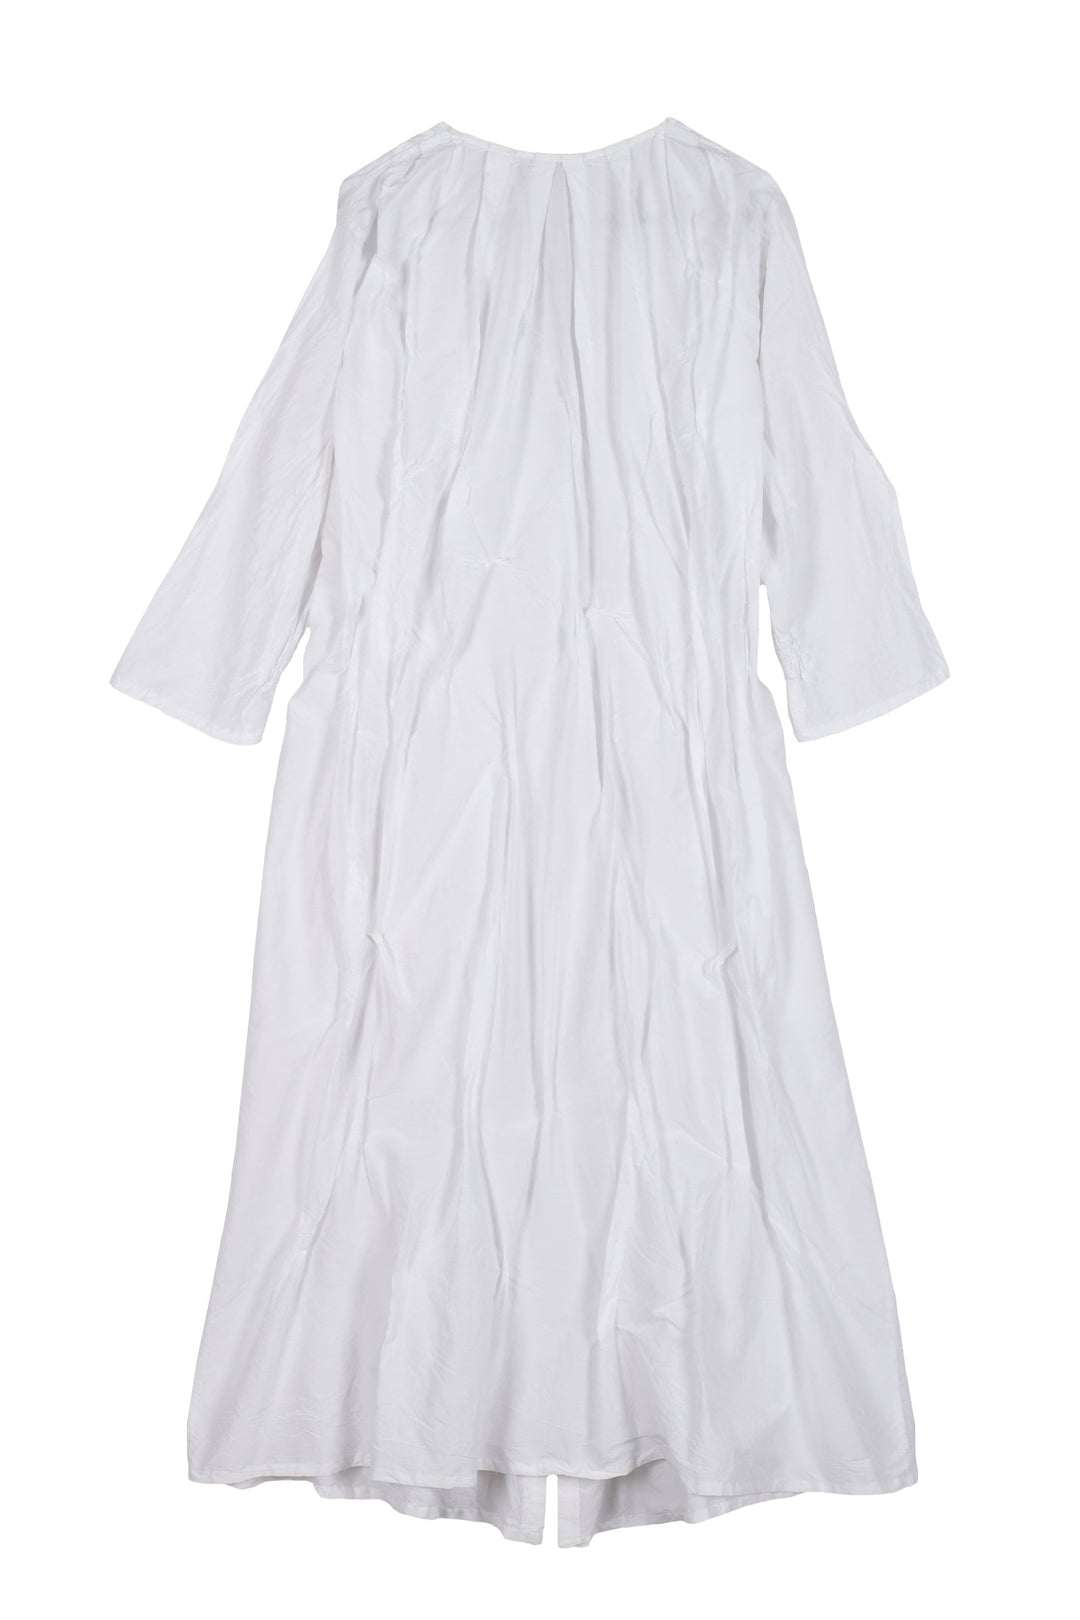 DYED COTTON SILK HEAVY VOILE WAVY TUCK CROPPED SLV. DRESS - dh1434-wht -